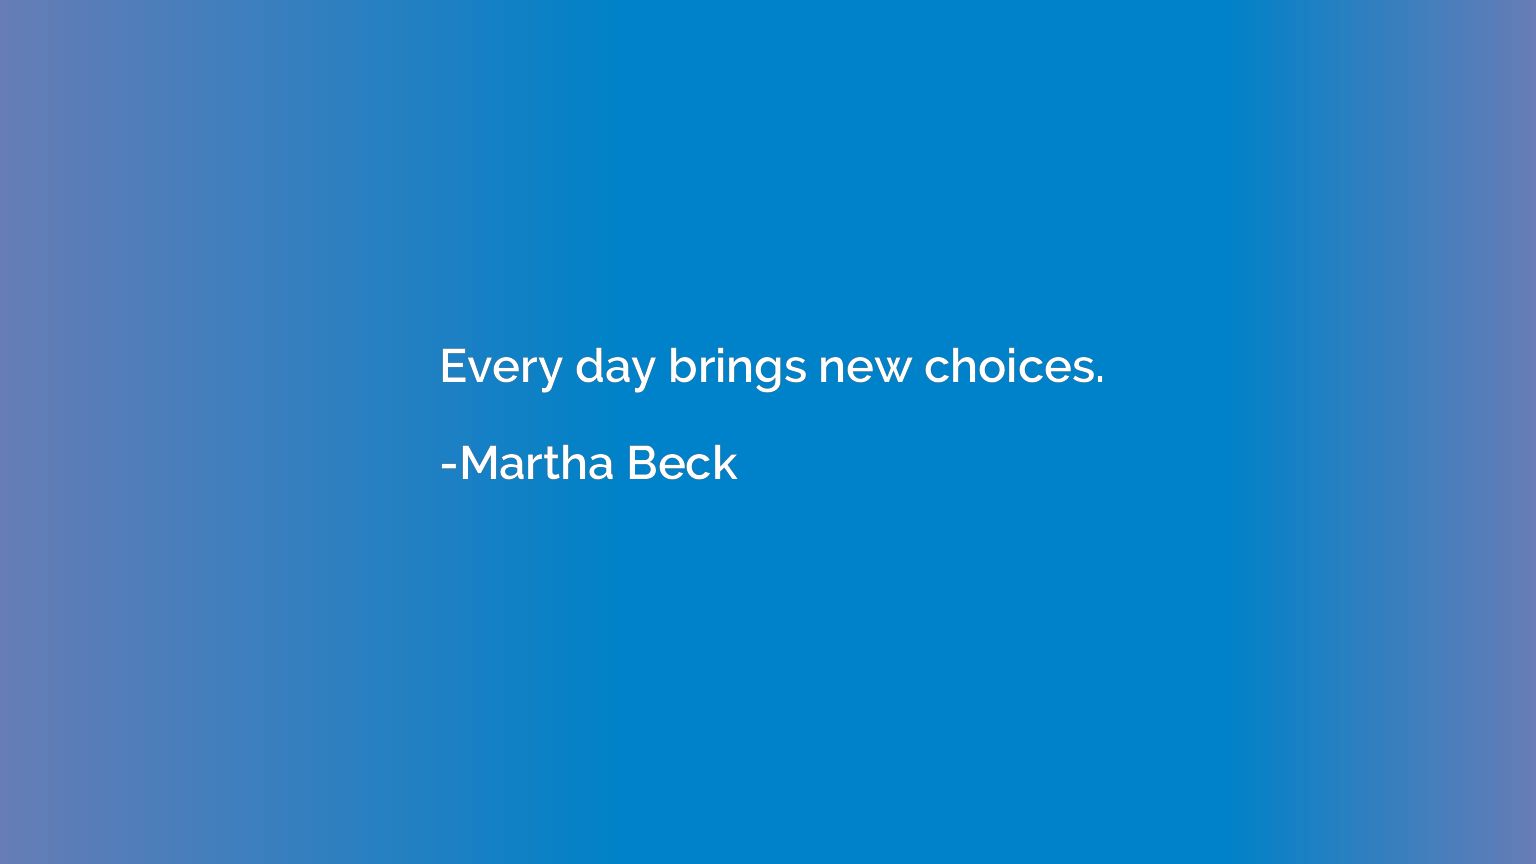 Every day brings new choices.